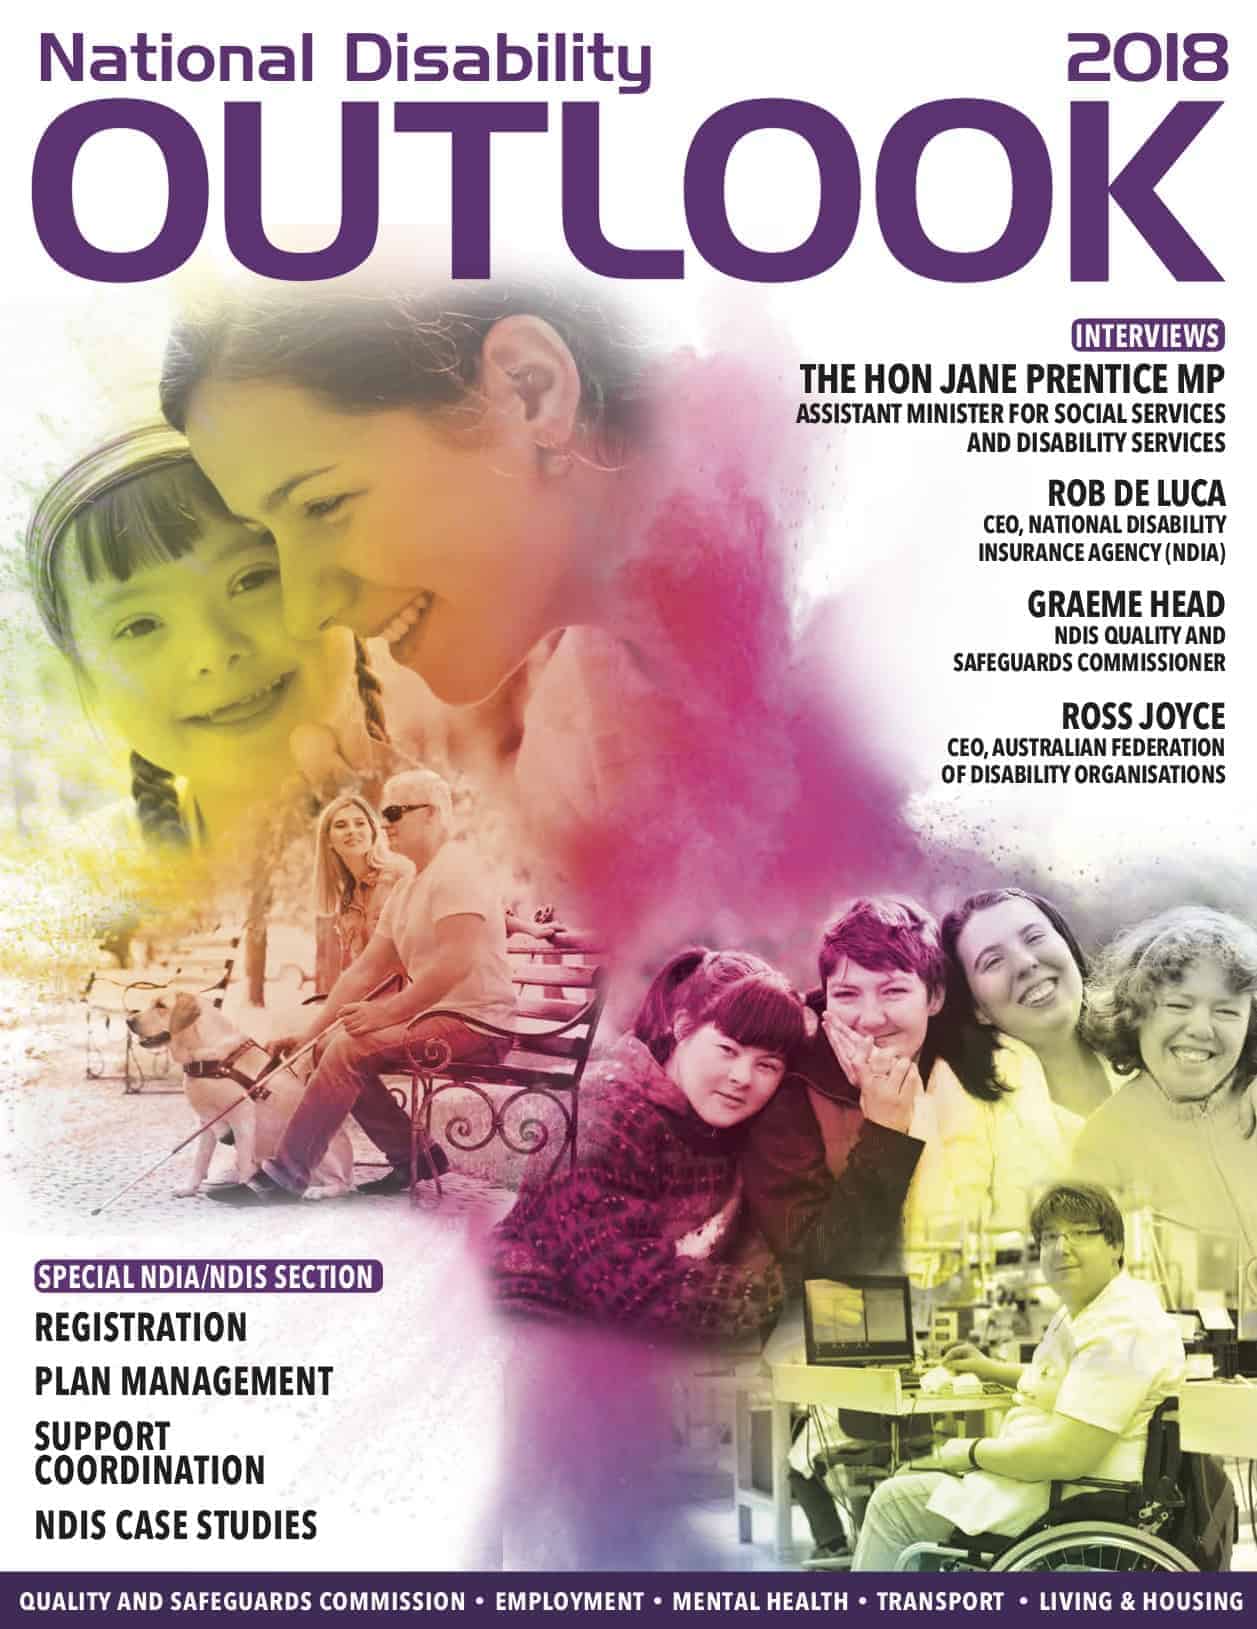 NATIONAL DISABILITY OUTLOOK 2018